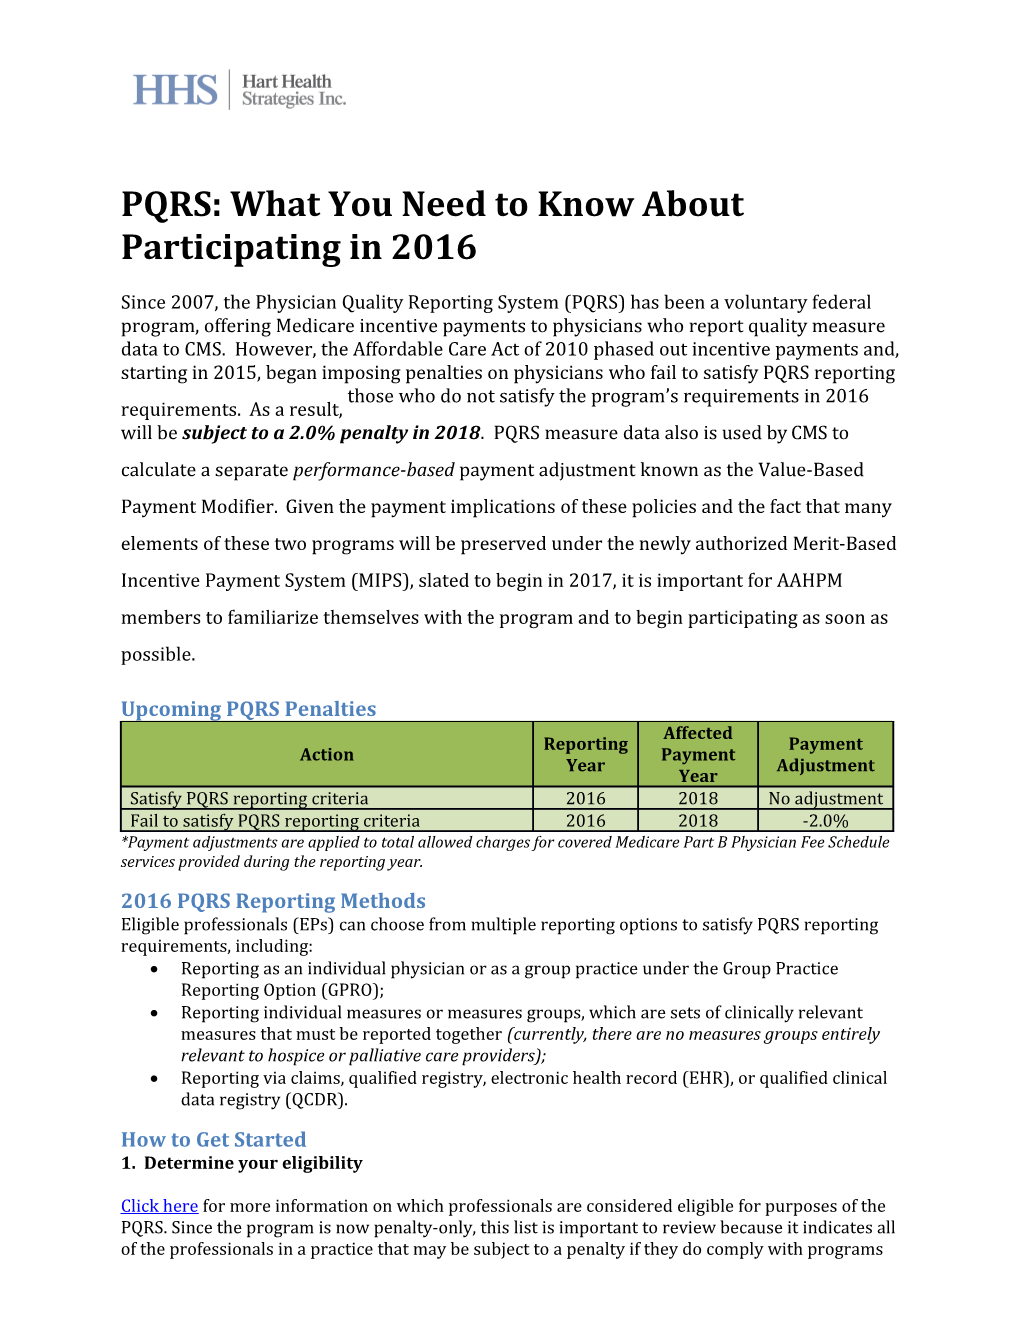 PQRS: What You Need to Know About Participating in 2016